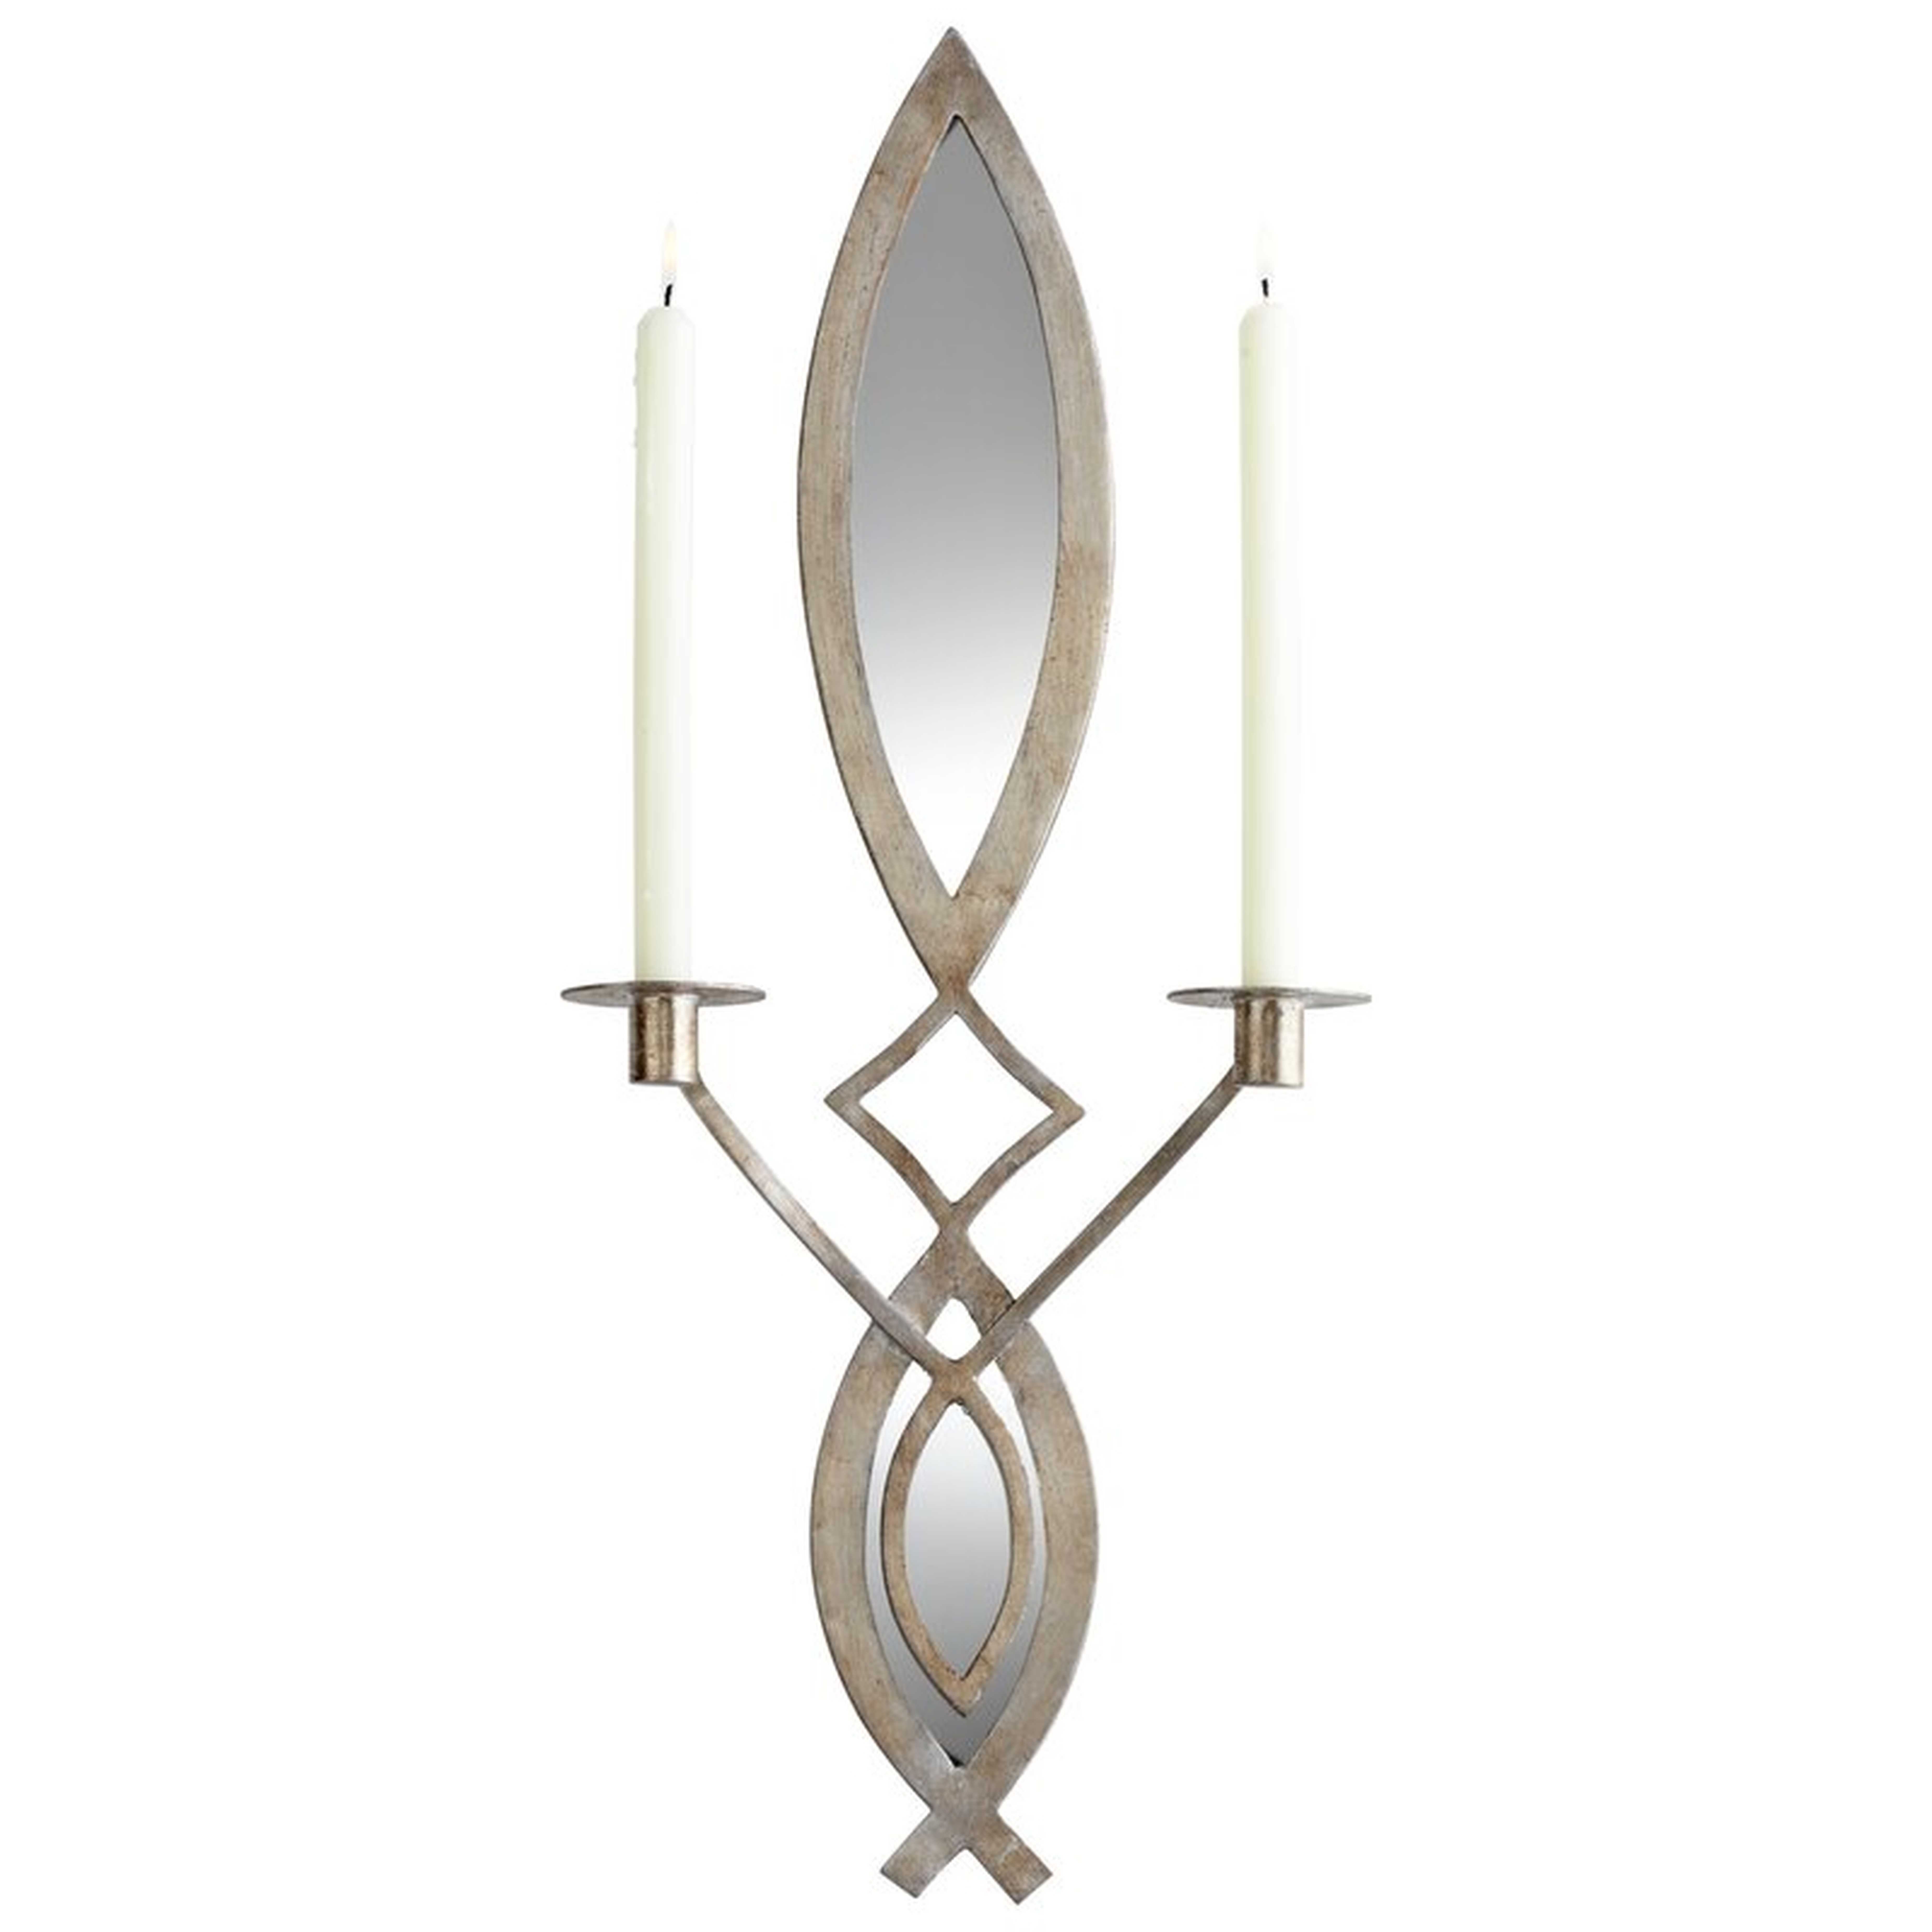 Exclamation 28" Iron Wall Sconce with Candle Included - Wayfair